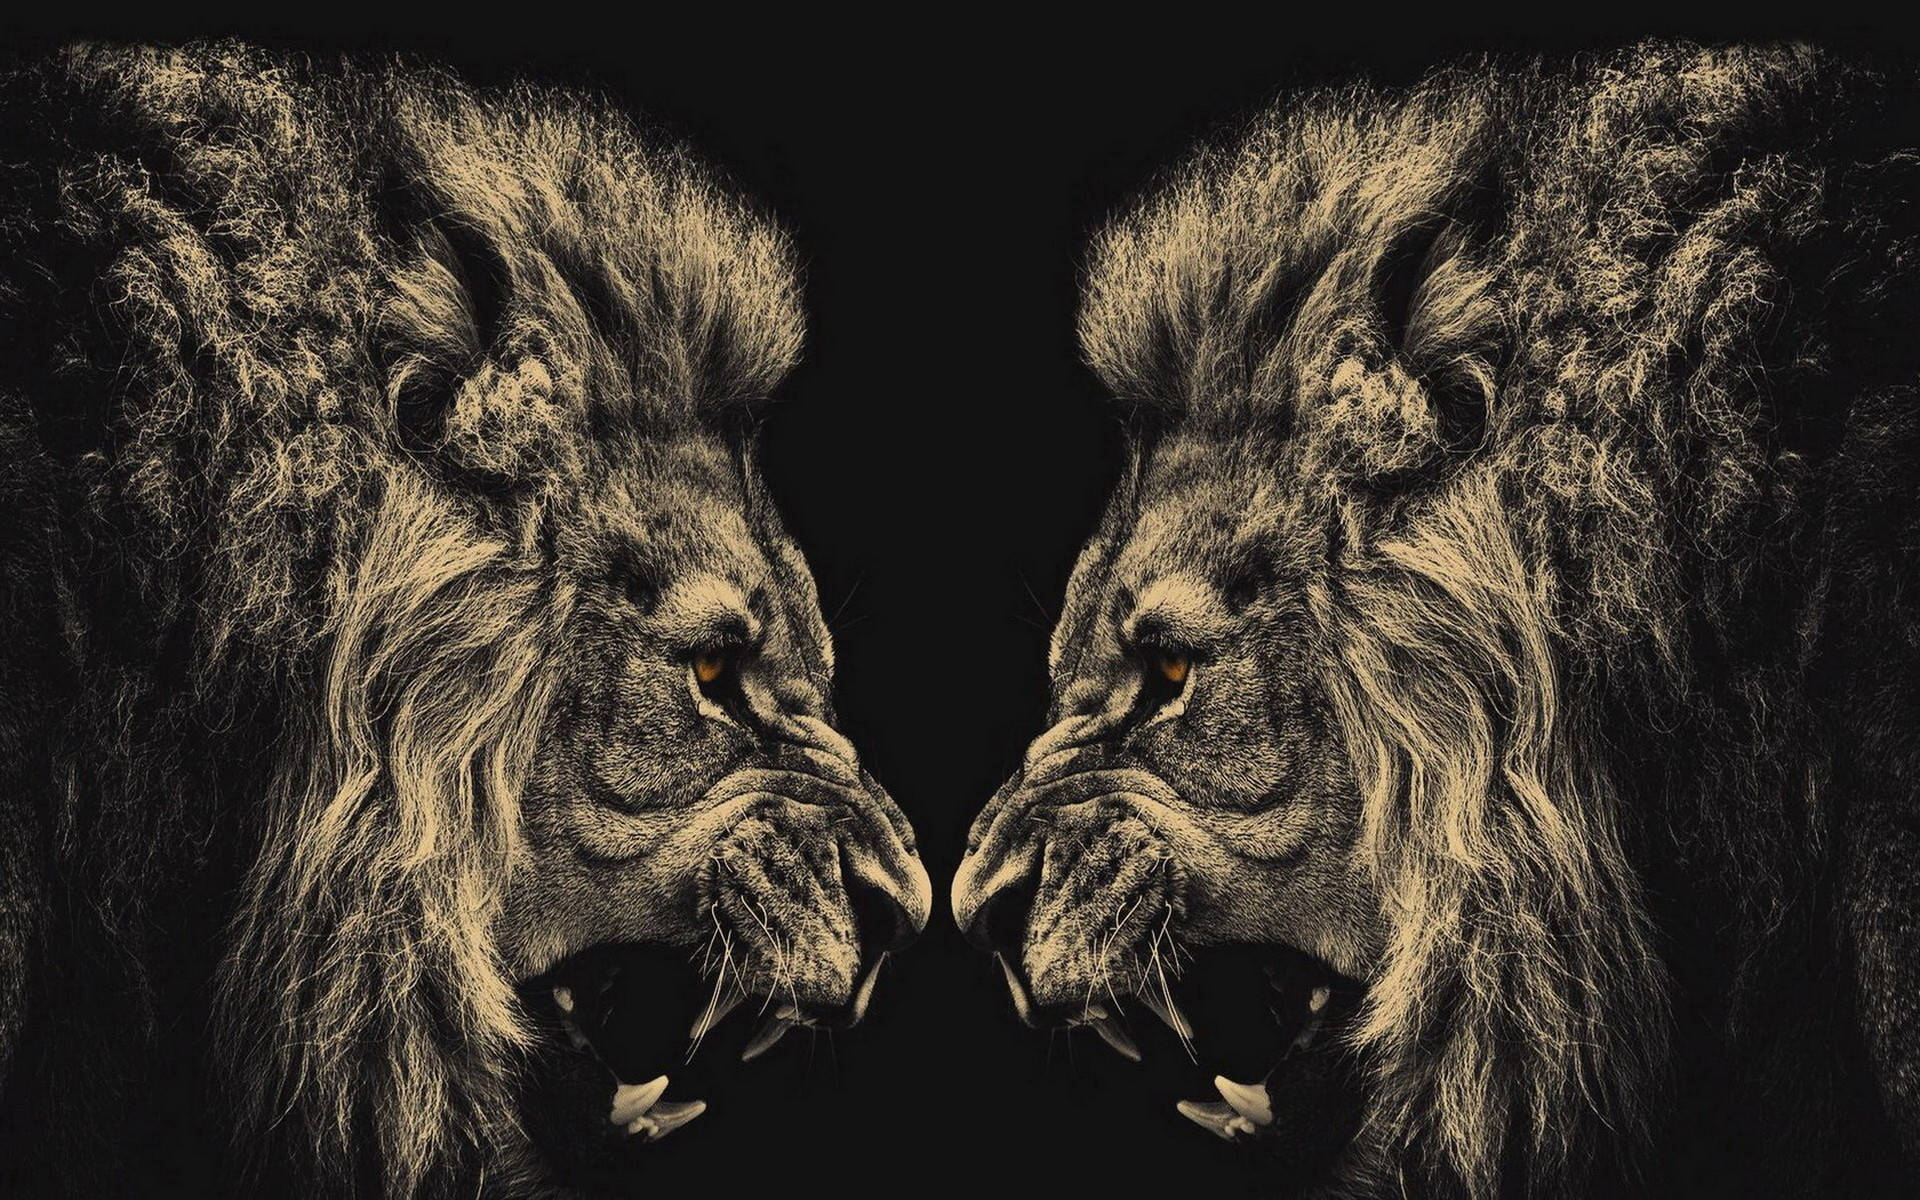 To Angry Lions Illustration Wallpaper